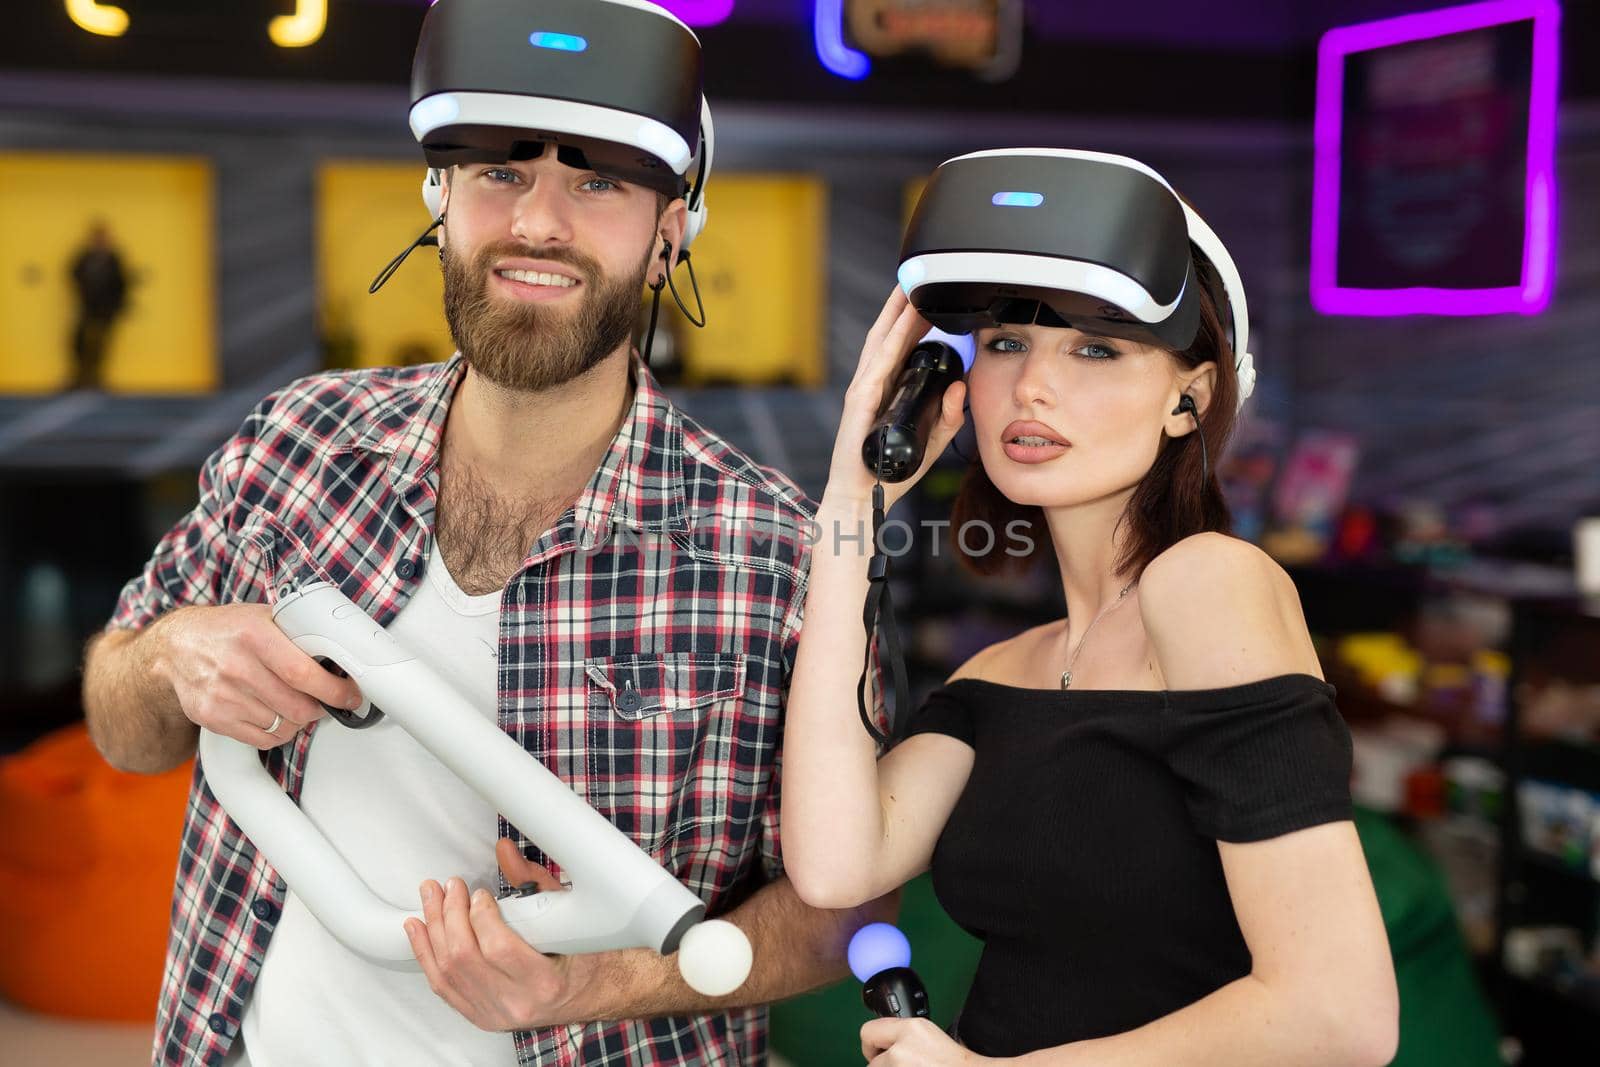 Portrait of a man and a woman with a virtual reality headset with glasses and hand motion controllers in a game club.